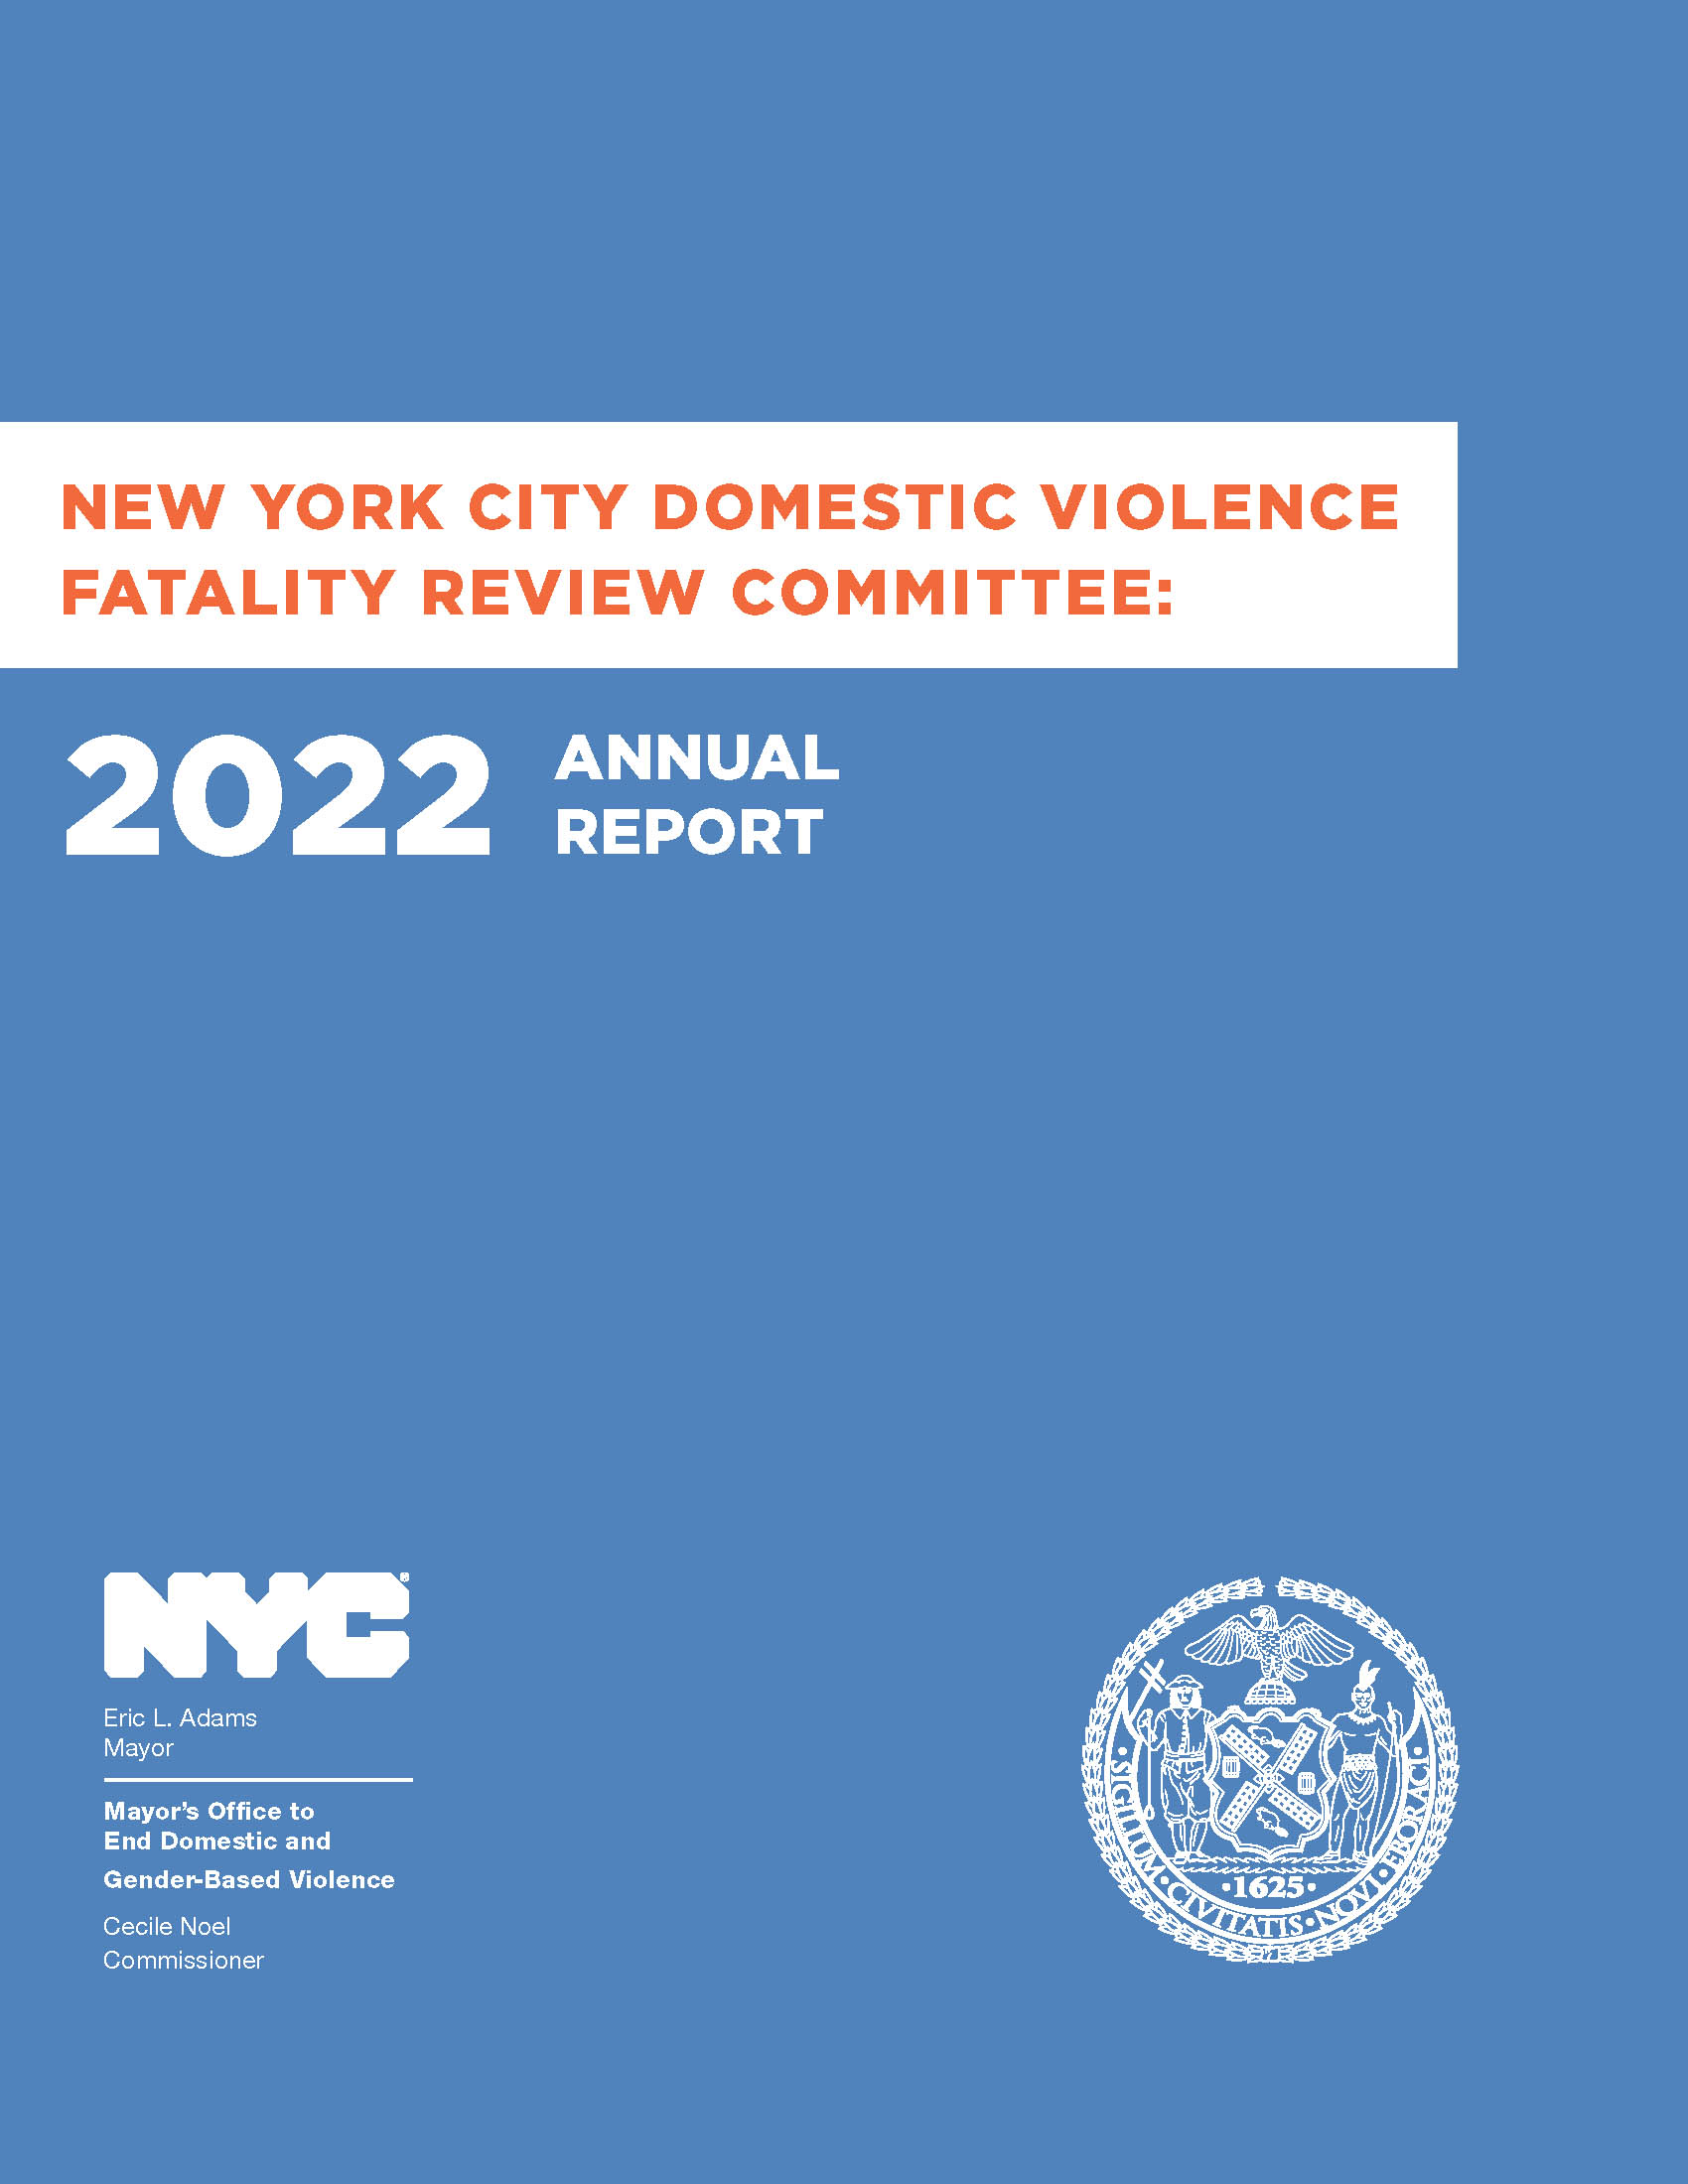 Light blue background Rectangle Cover of ENDGBV Annual Report with title: “NYC Domestic Violence Fatality Review Committee: 2022 Annual Report.”On the bottom of graphic is state seal of New York City Mayor's Office, Eric Adams.